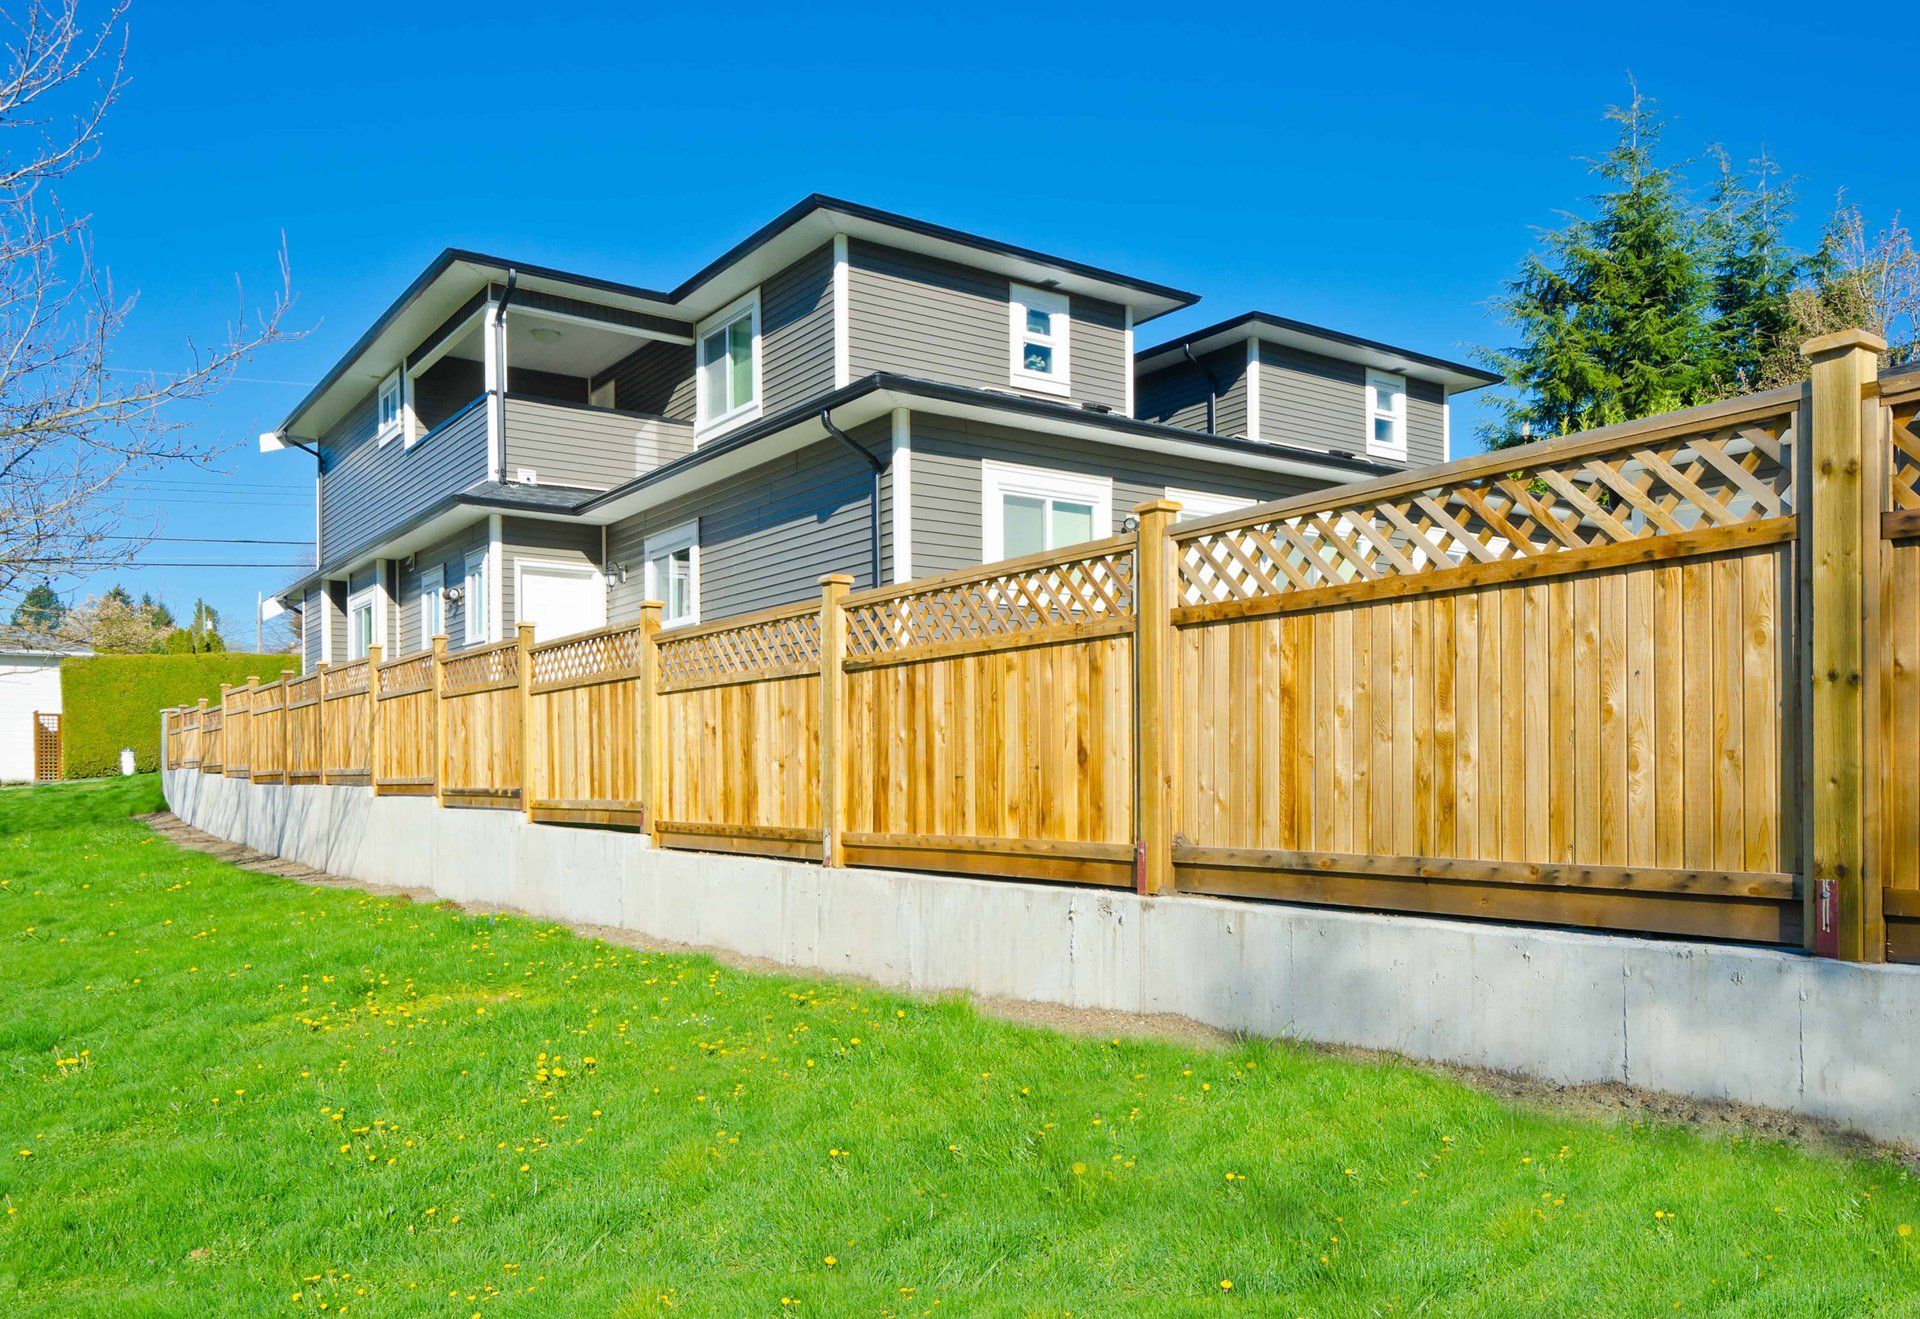 Residential wood fences